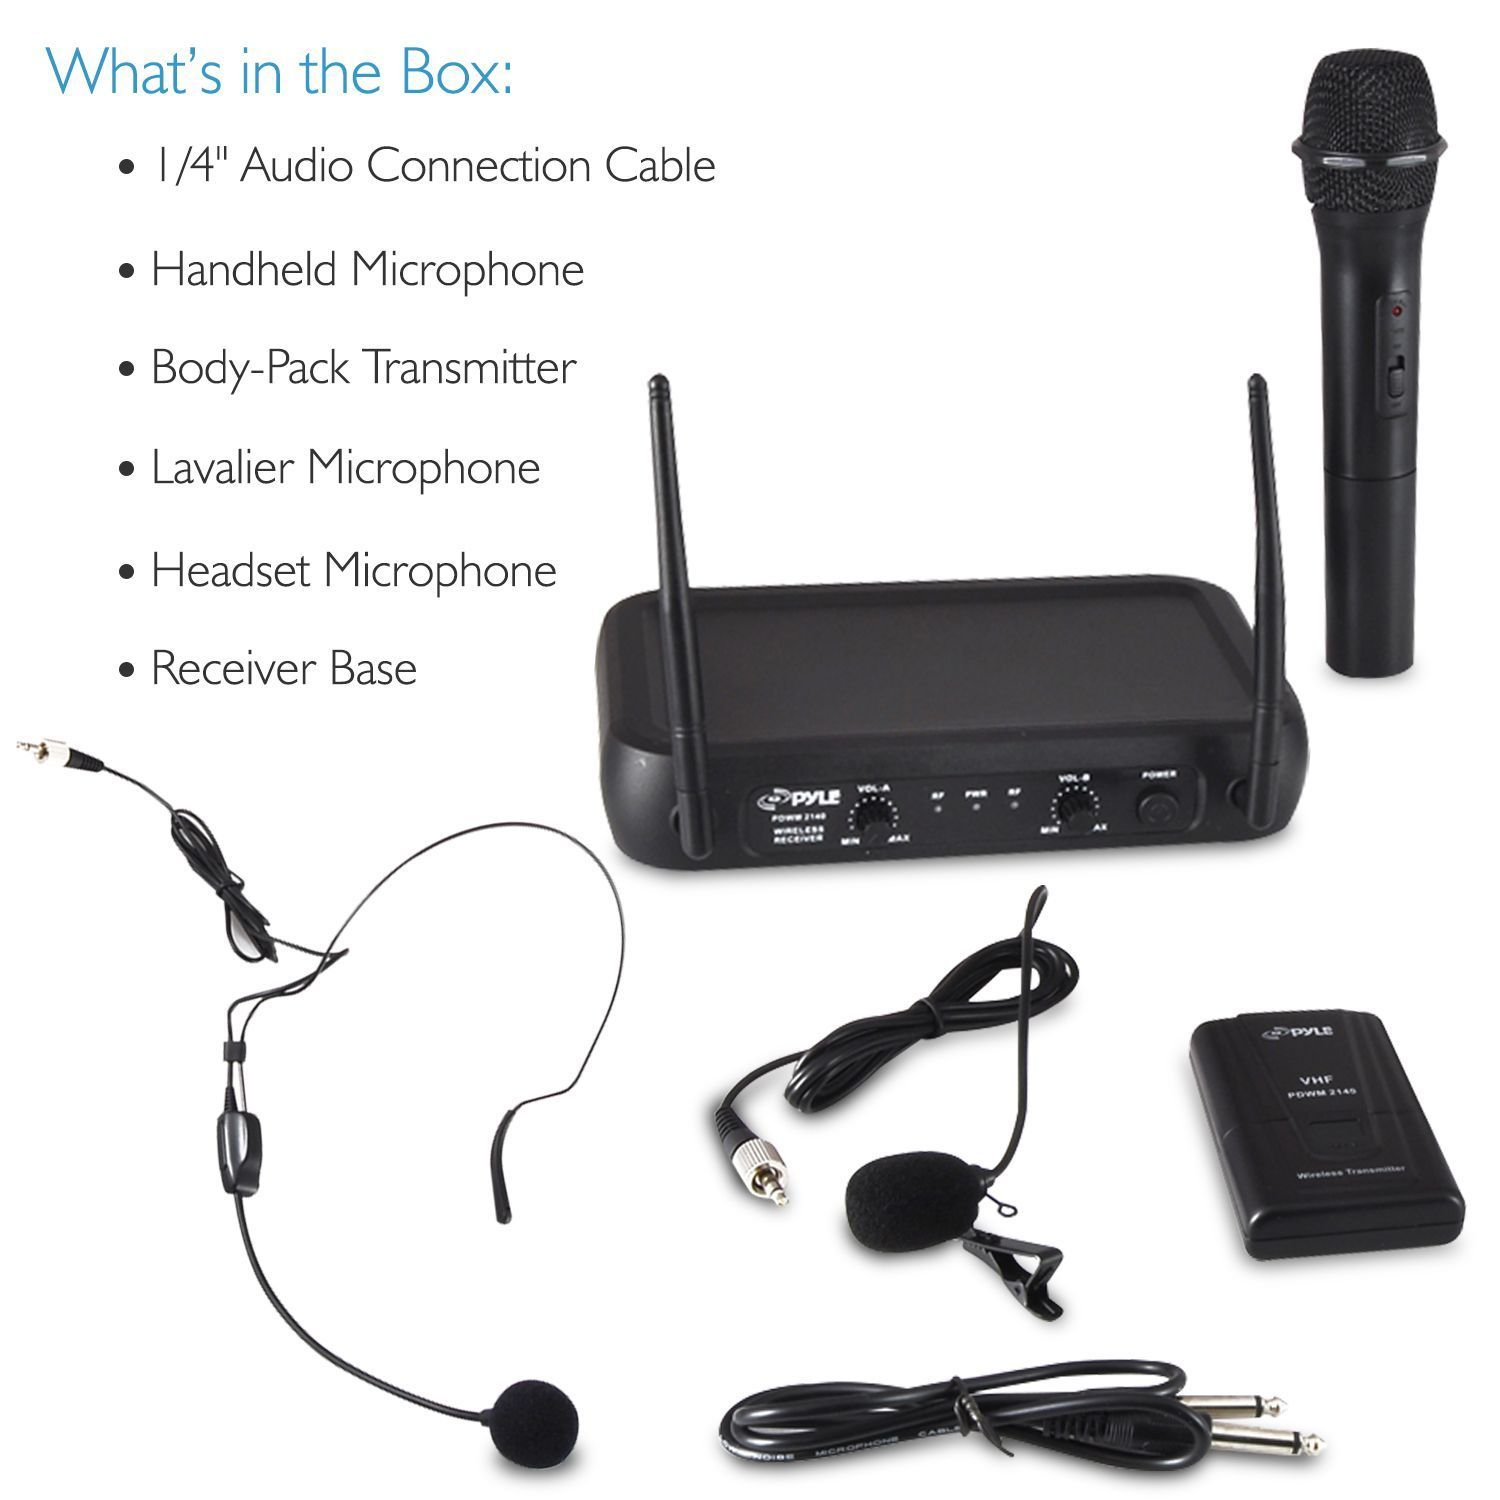 VHF Wireless Microphone System, Fixed Frequency, Independent Adjustable Volume Controls (Includes Handheld Mic, Body Pack Transmitter, Lavalier Mic, Headset Mic)